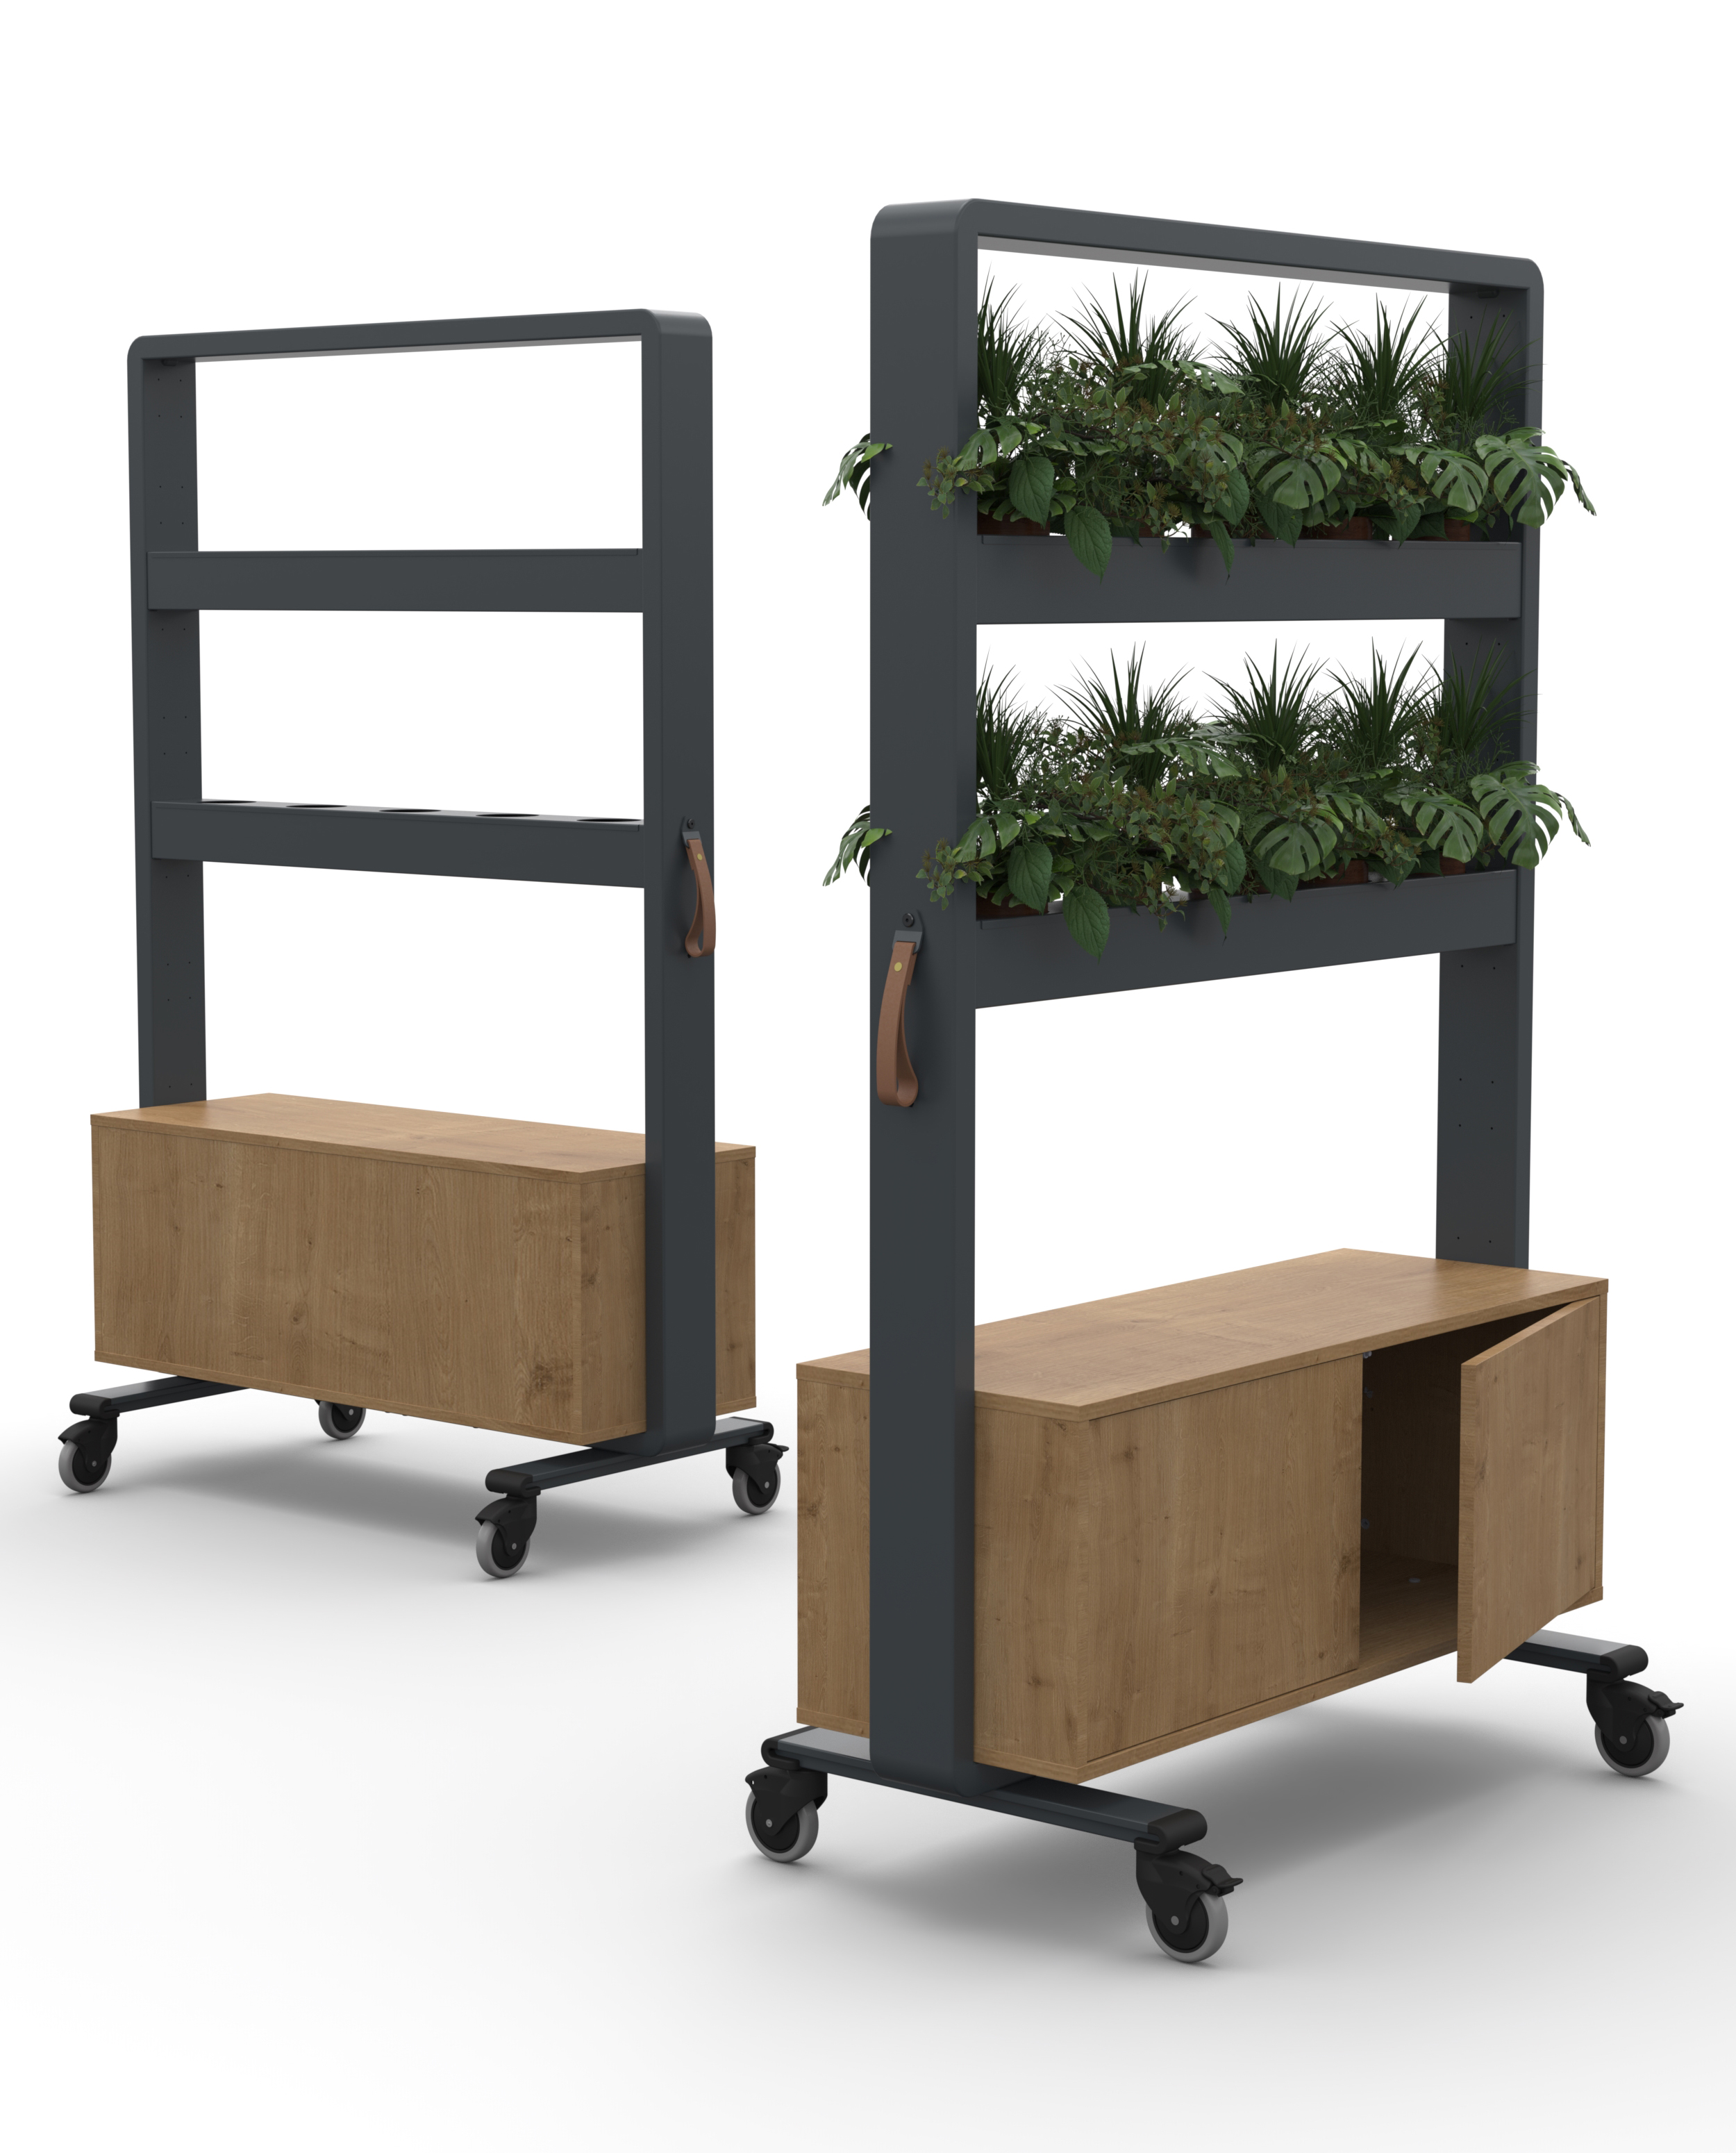 Motion Divider - Planters, incl MFC storage at bottom